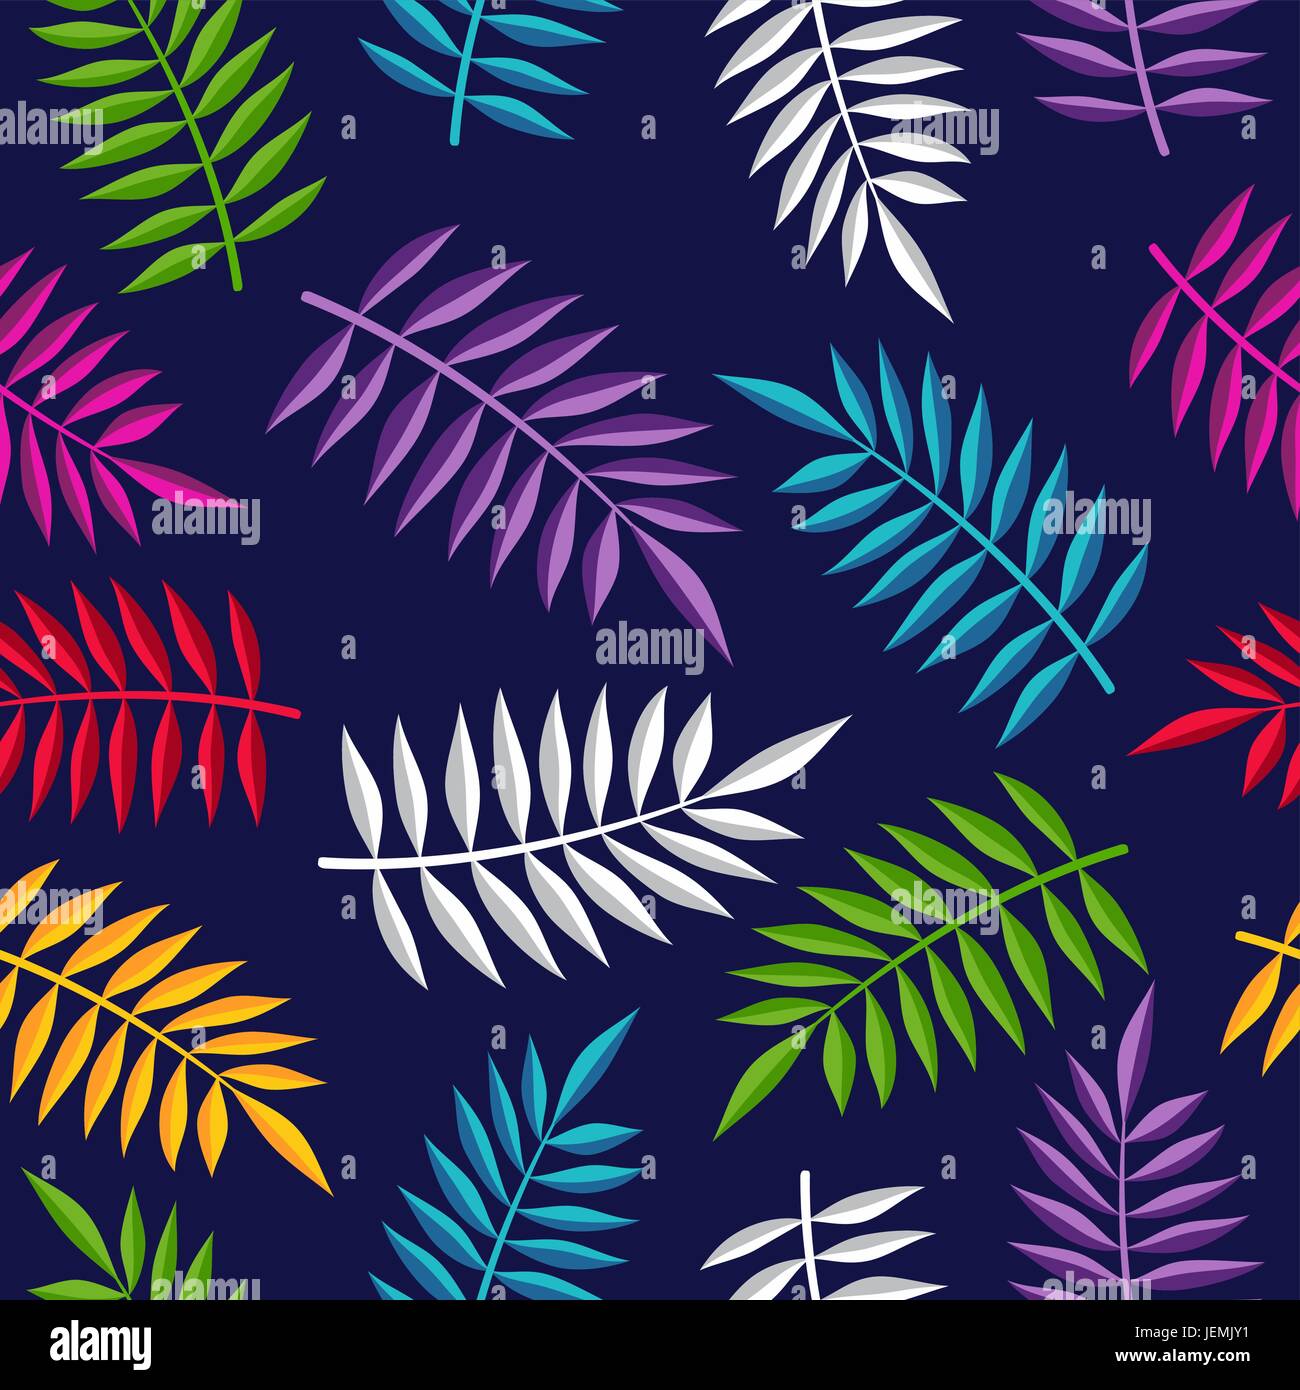 Tropical summer seamless pattern with colorful jungle palm tree leaf illustration. EPS10 vector. Stock Vector